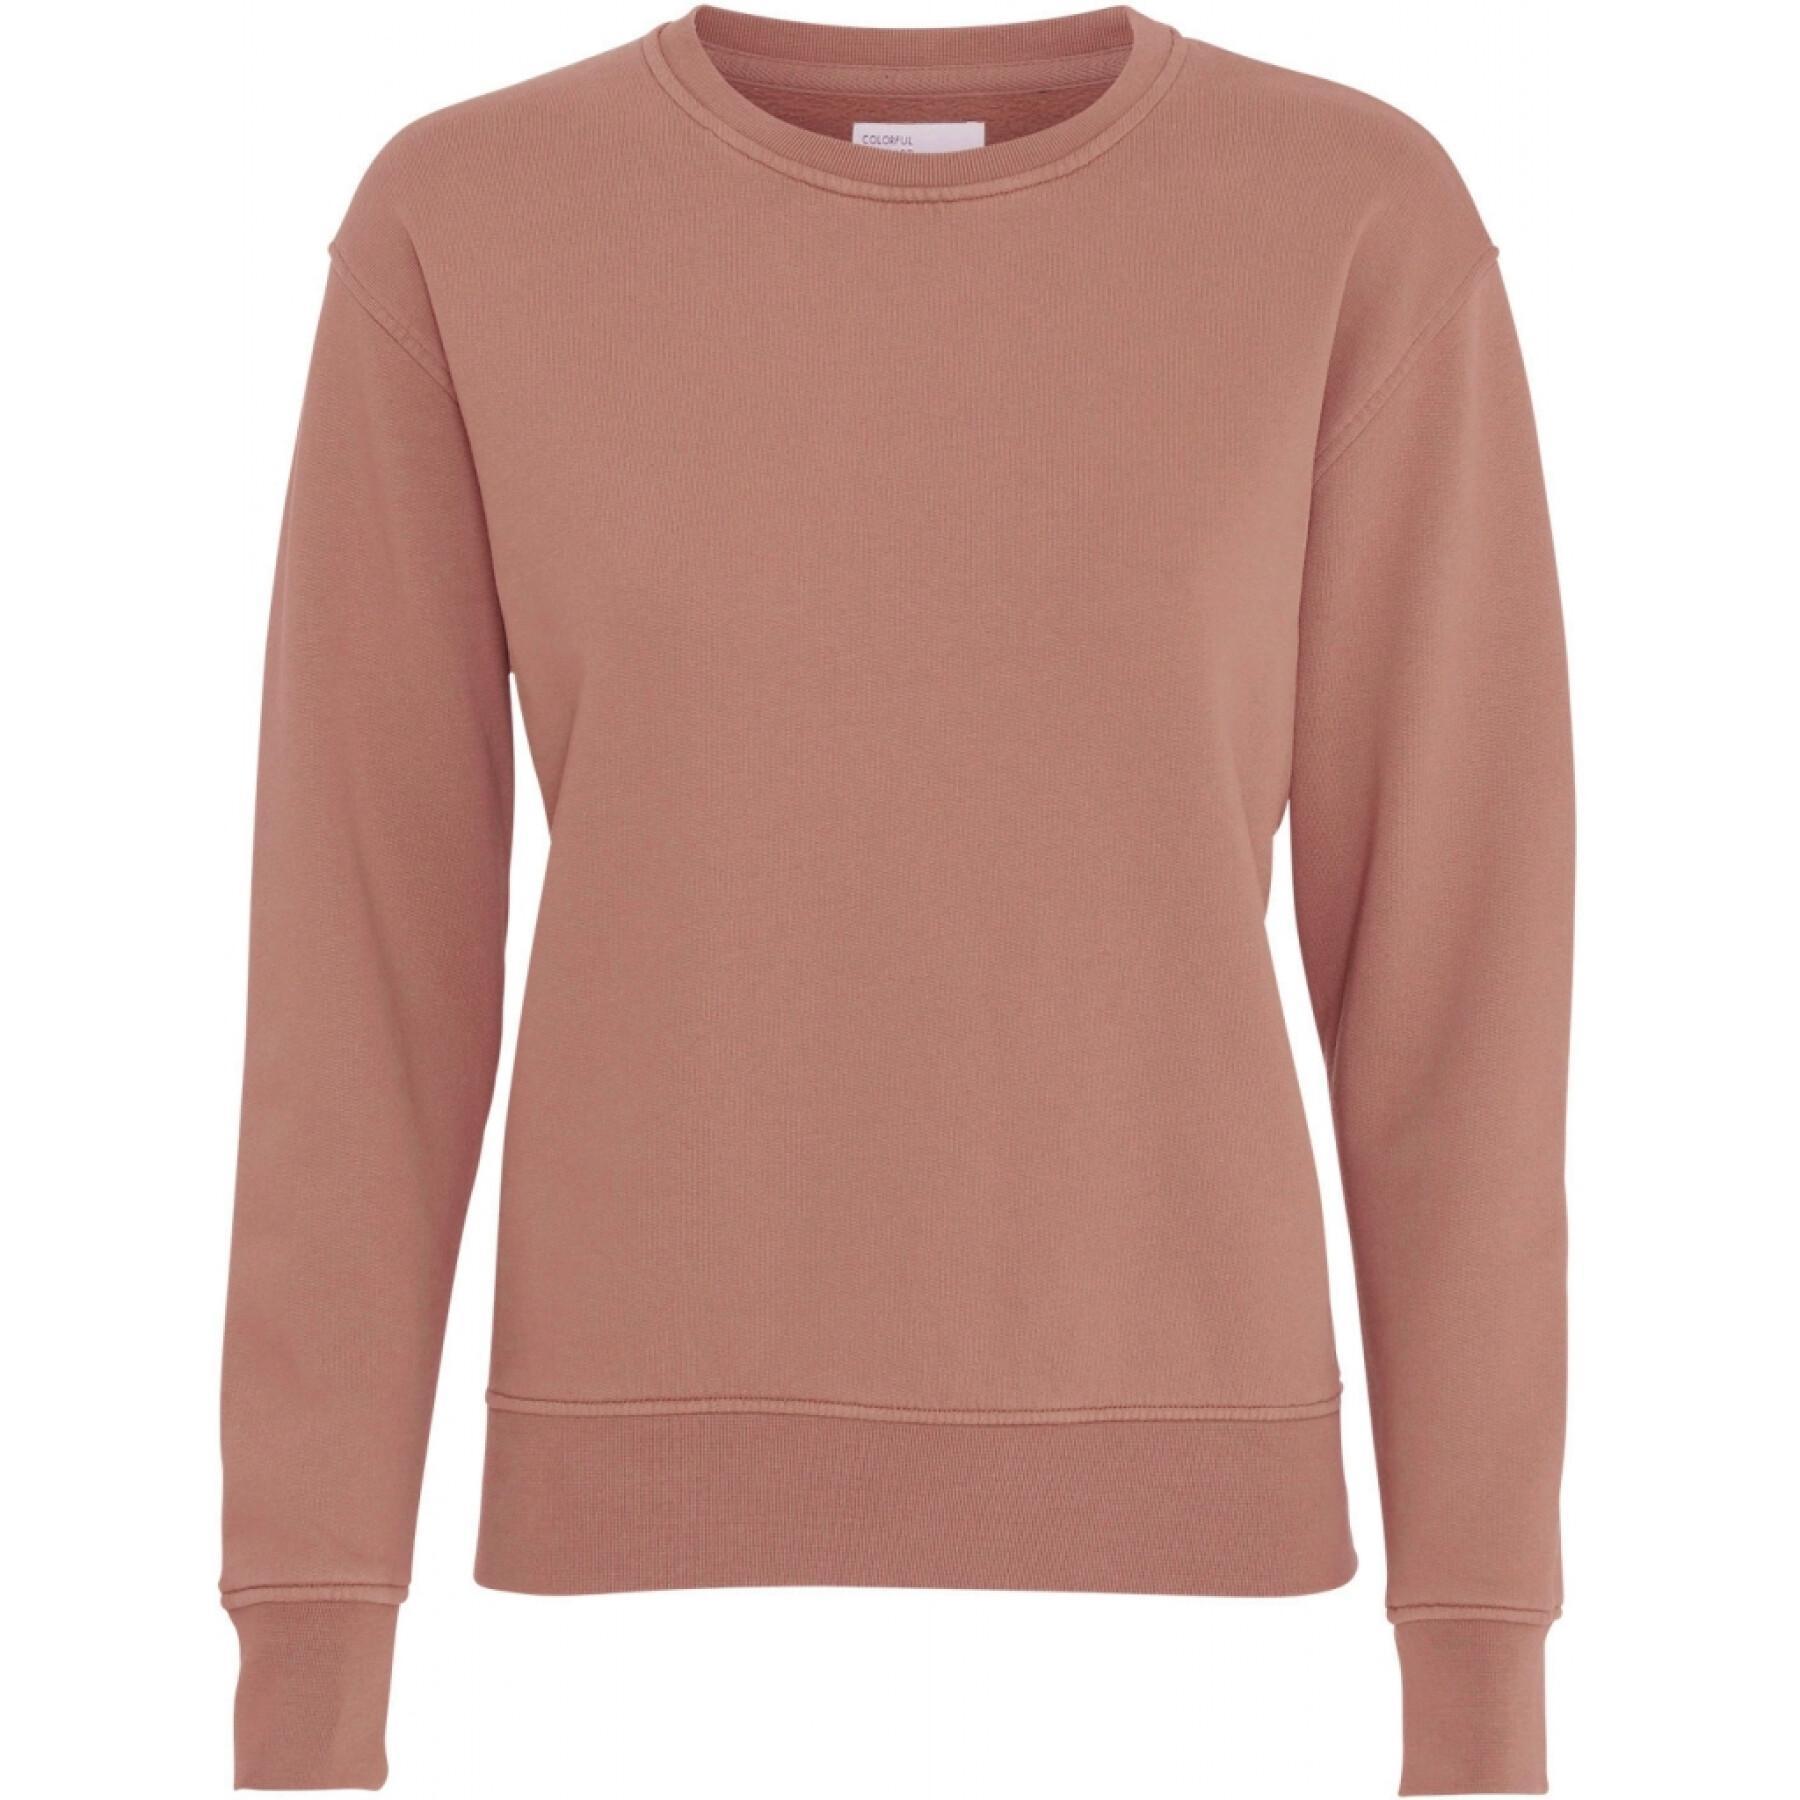 Women's round neck sweater Colorful Standard Classic Organic rosewood mist